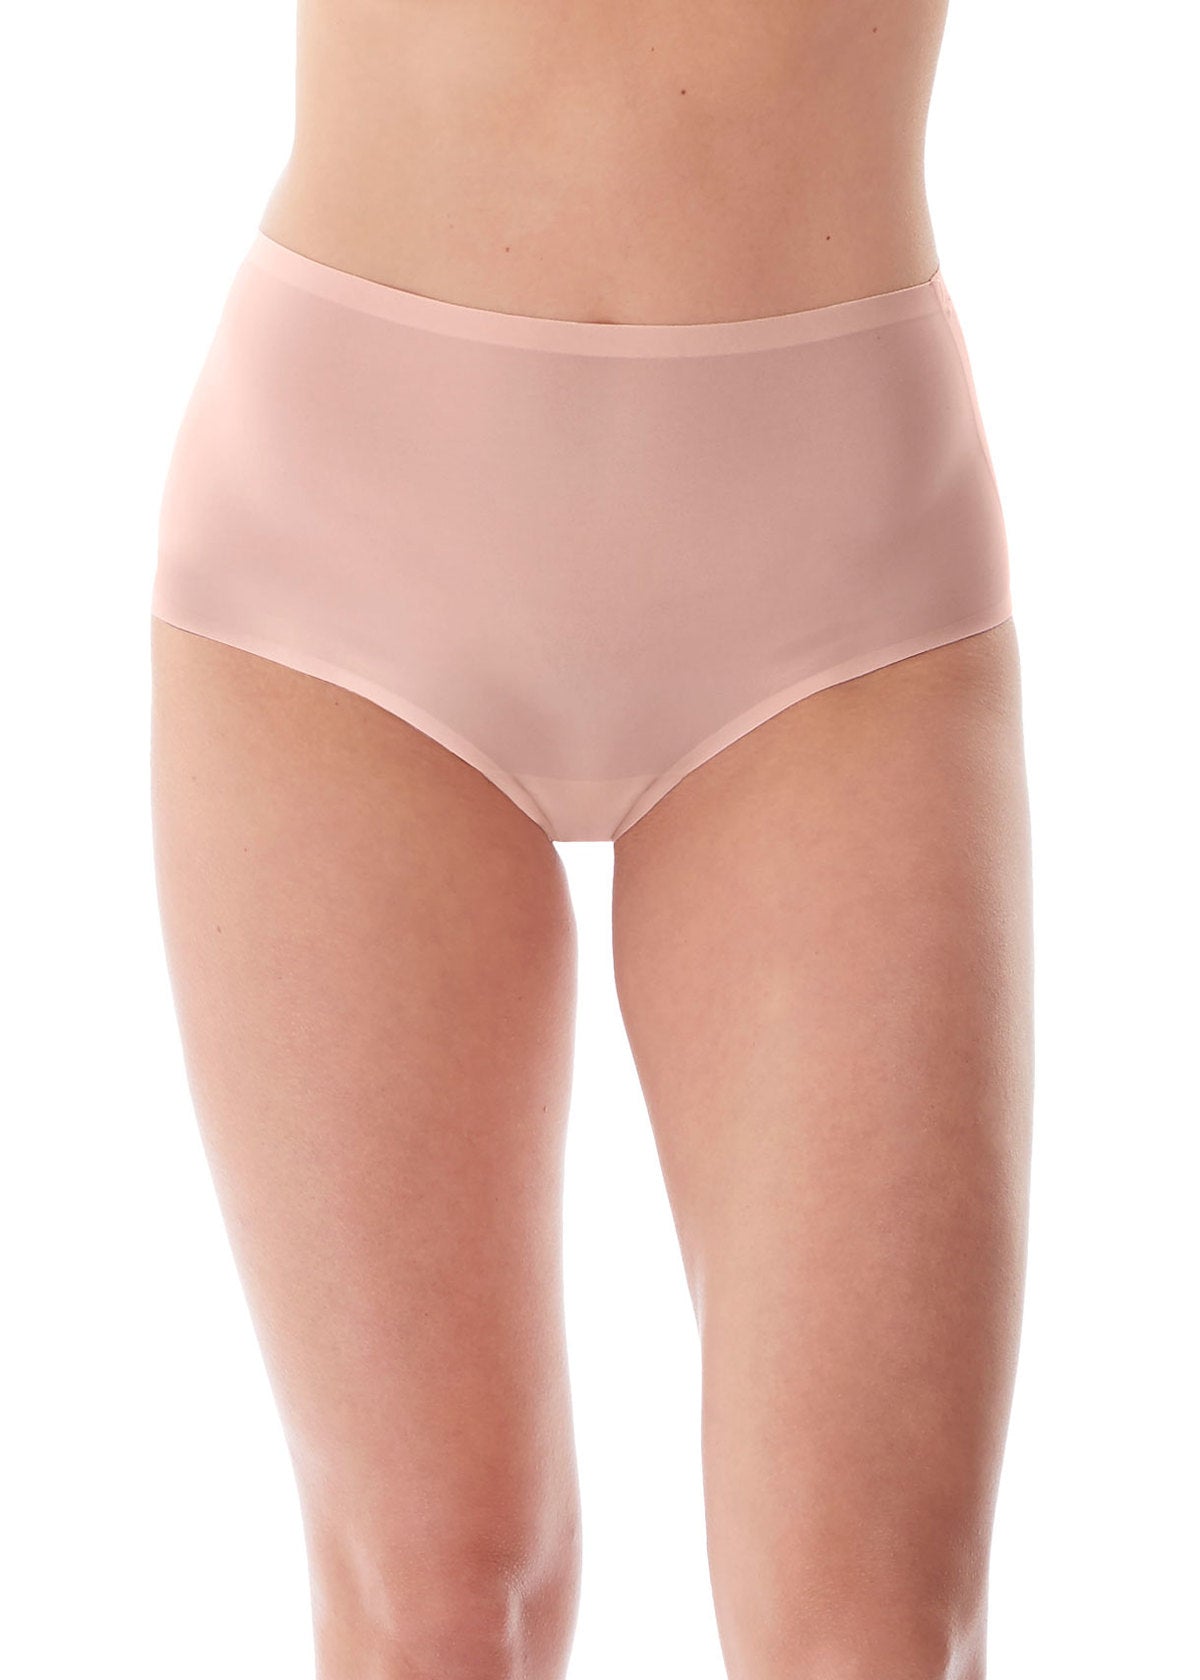 Fantasie Smoothease Invisible Stretch Full Brief Blush 1 Shaws Department Stores